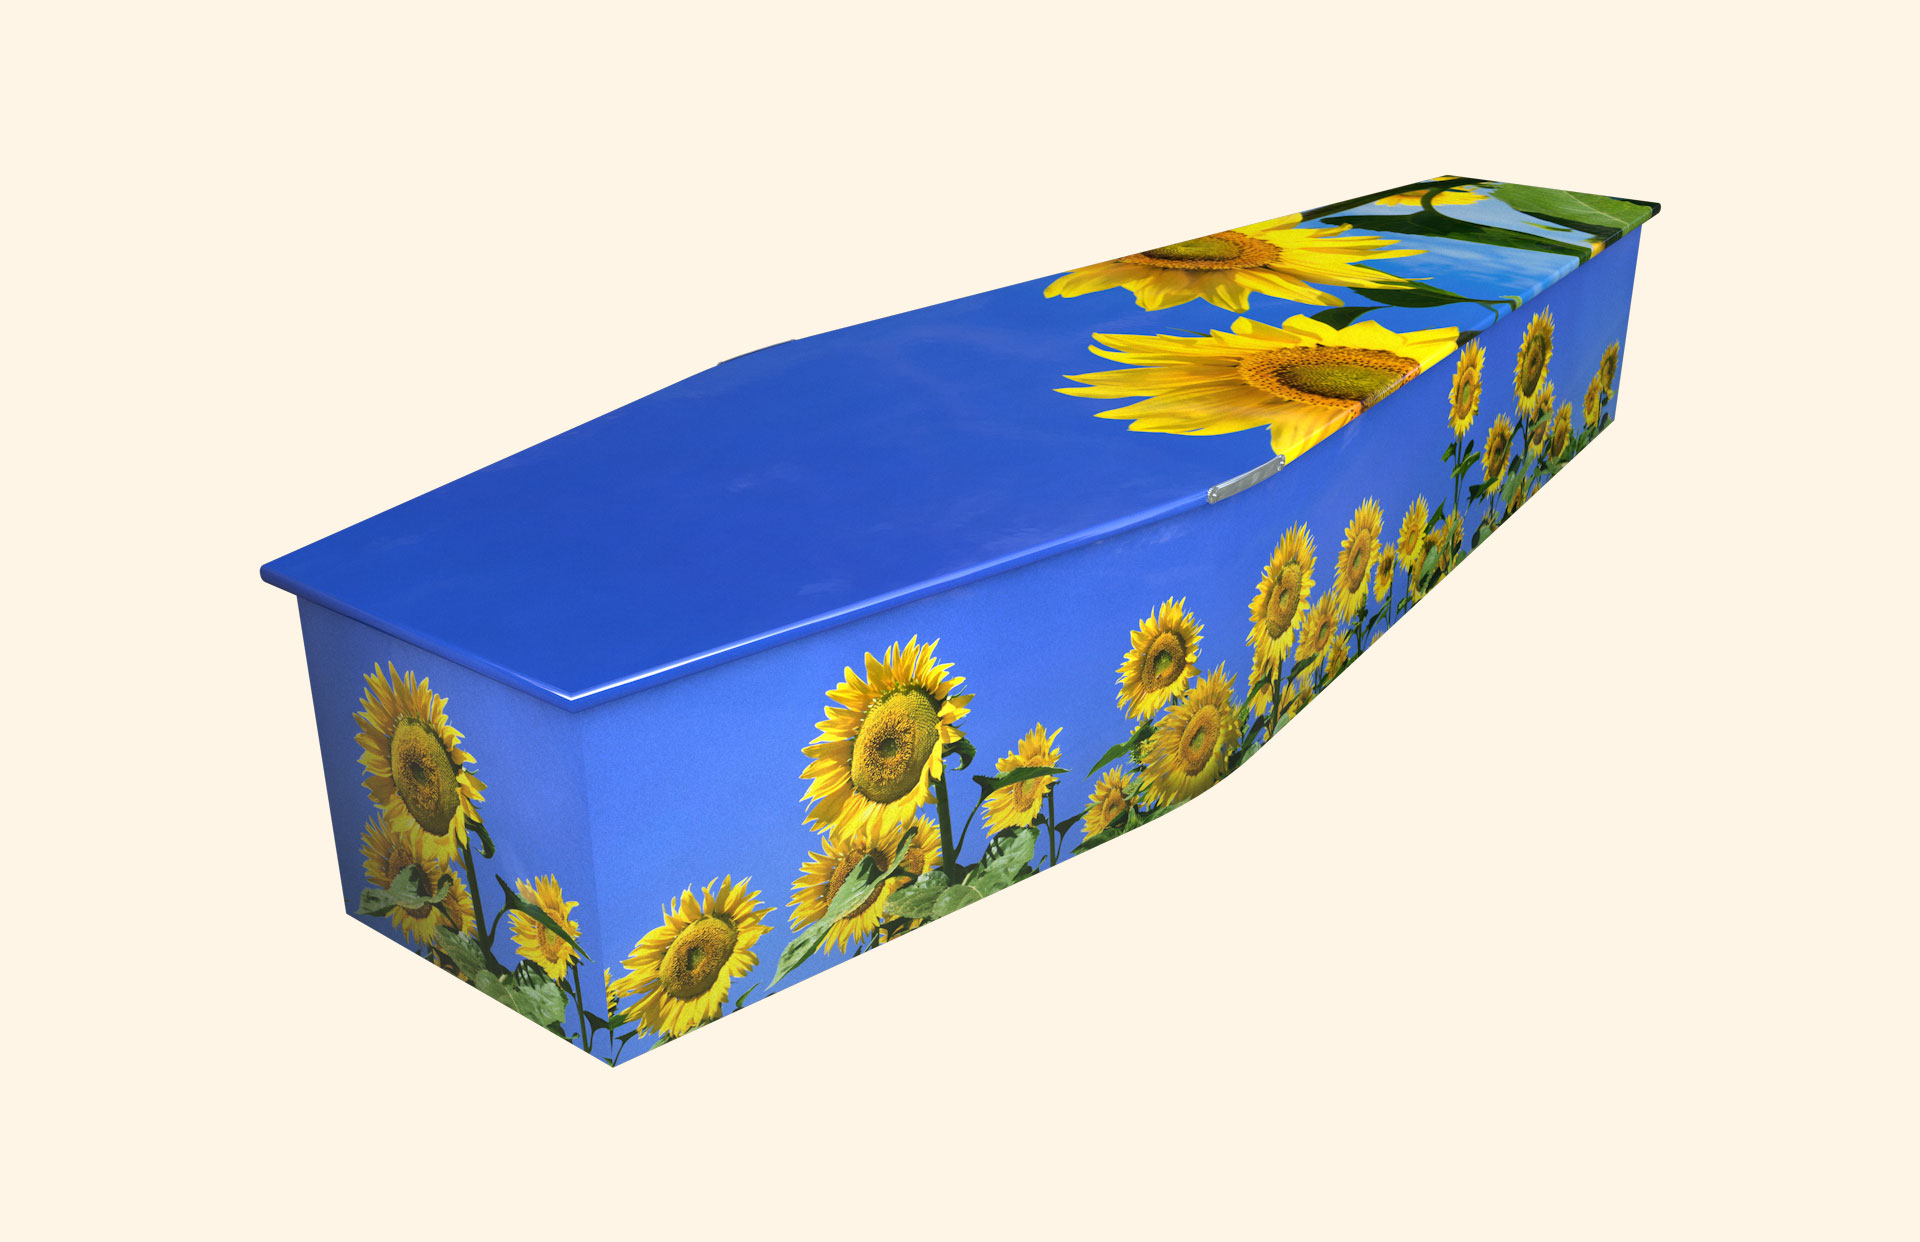 Sunflower Delight design on a traditional coffin